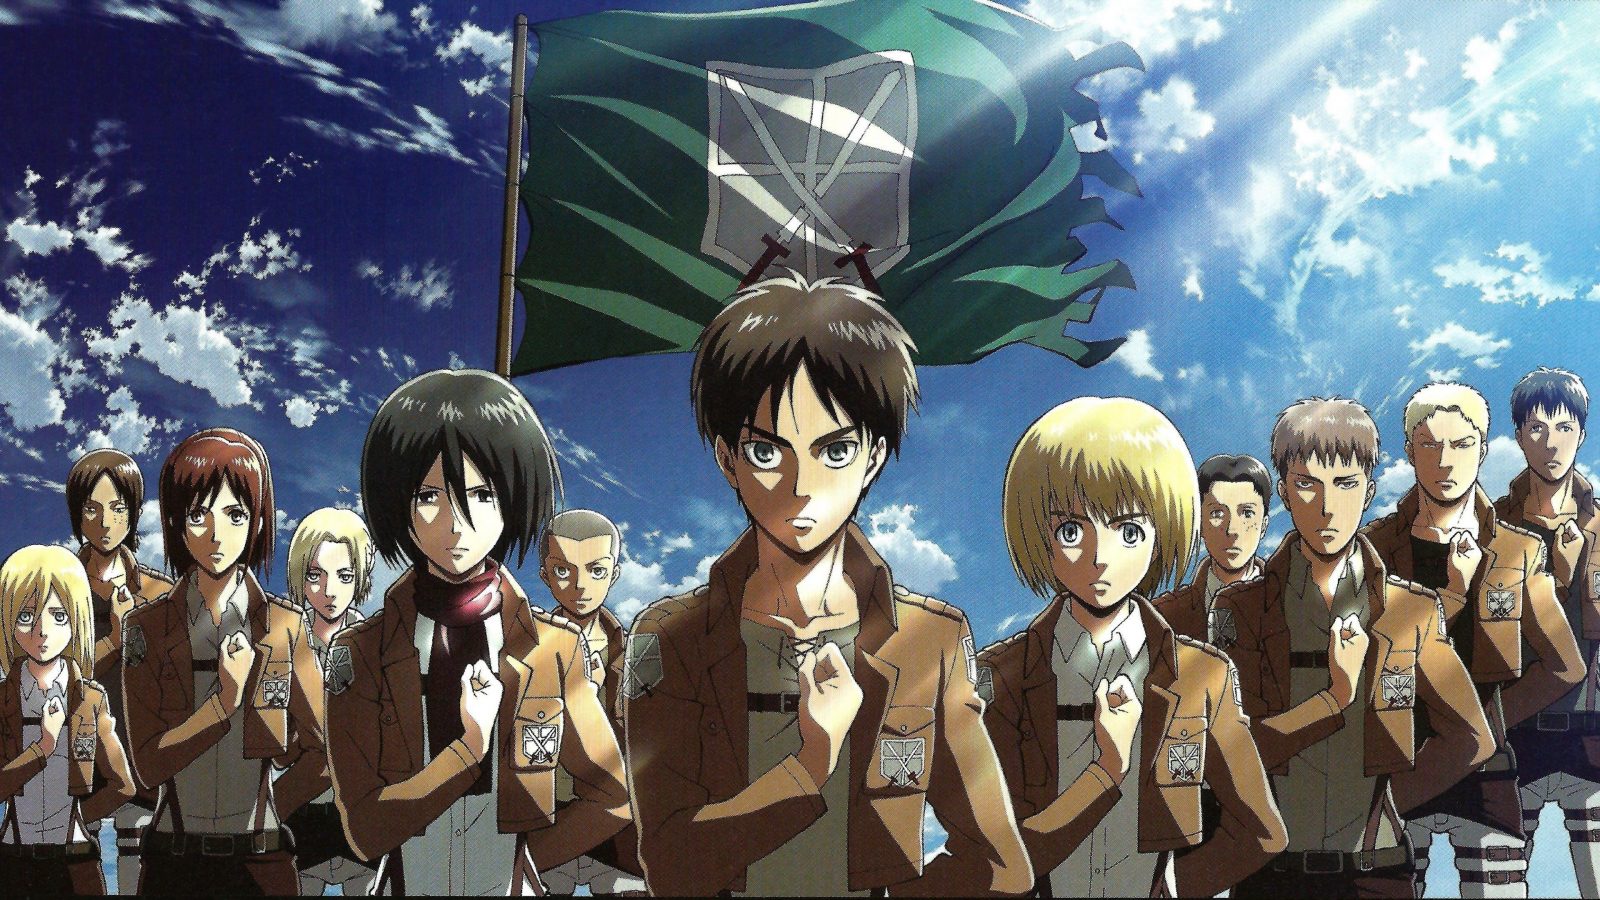 Will Attack on Titan Final Season Part 2 have an anime original ending  Visual teaser Special Event raises fan speculation